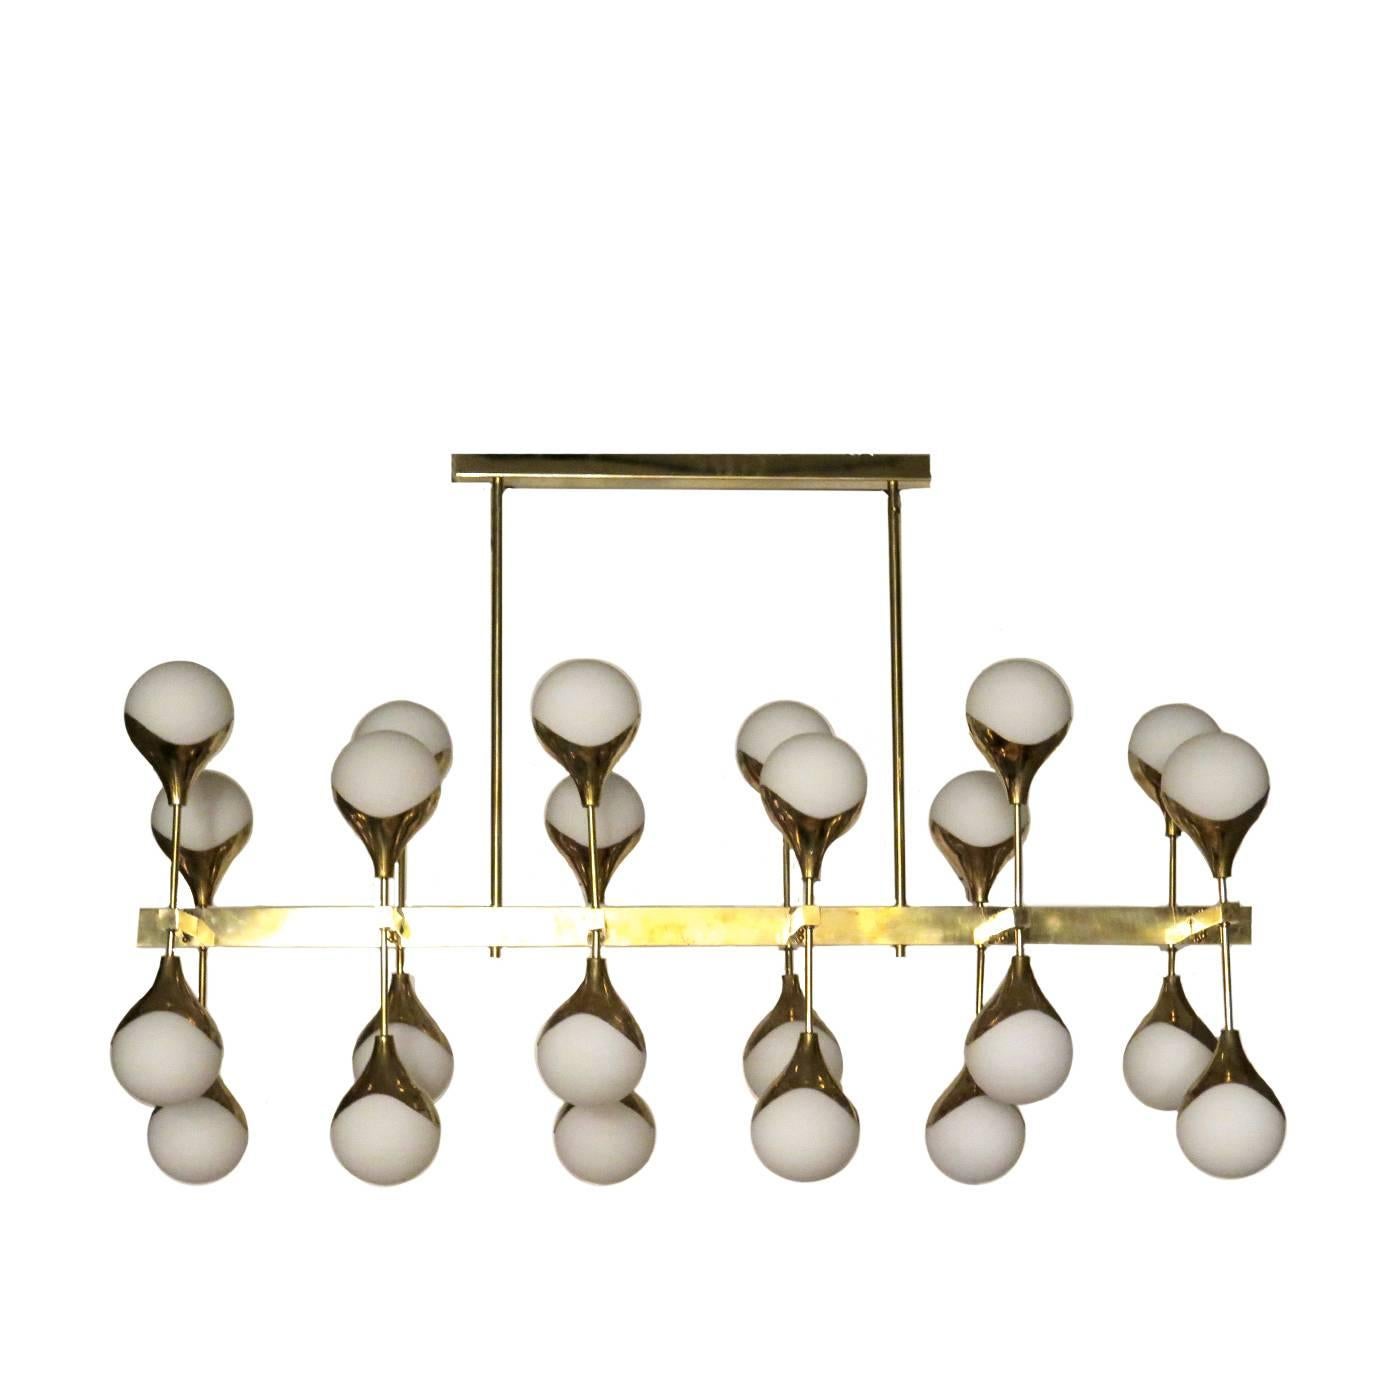 This imposing chandelier is composed of twenty-four lights enclosed in white glass spheres. The structure is in elegant brushed brass and consists of a long rod supported by a shorter stick attached to the ceiling. The lights are paired in two and